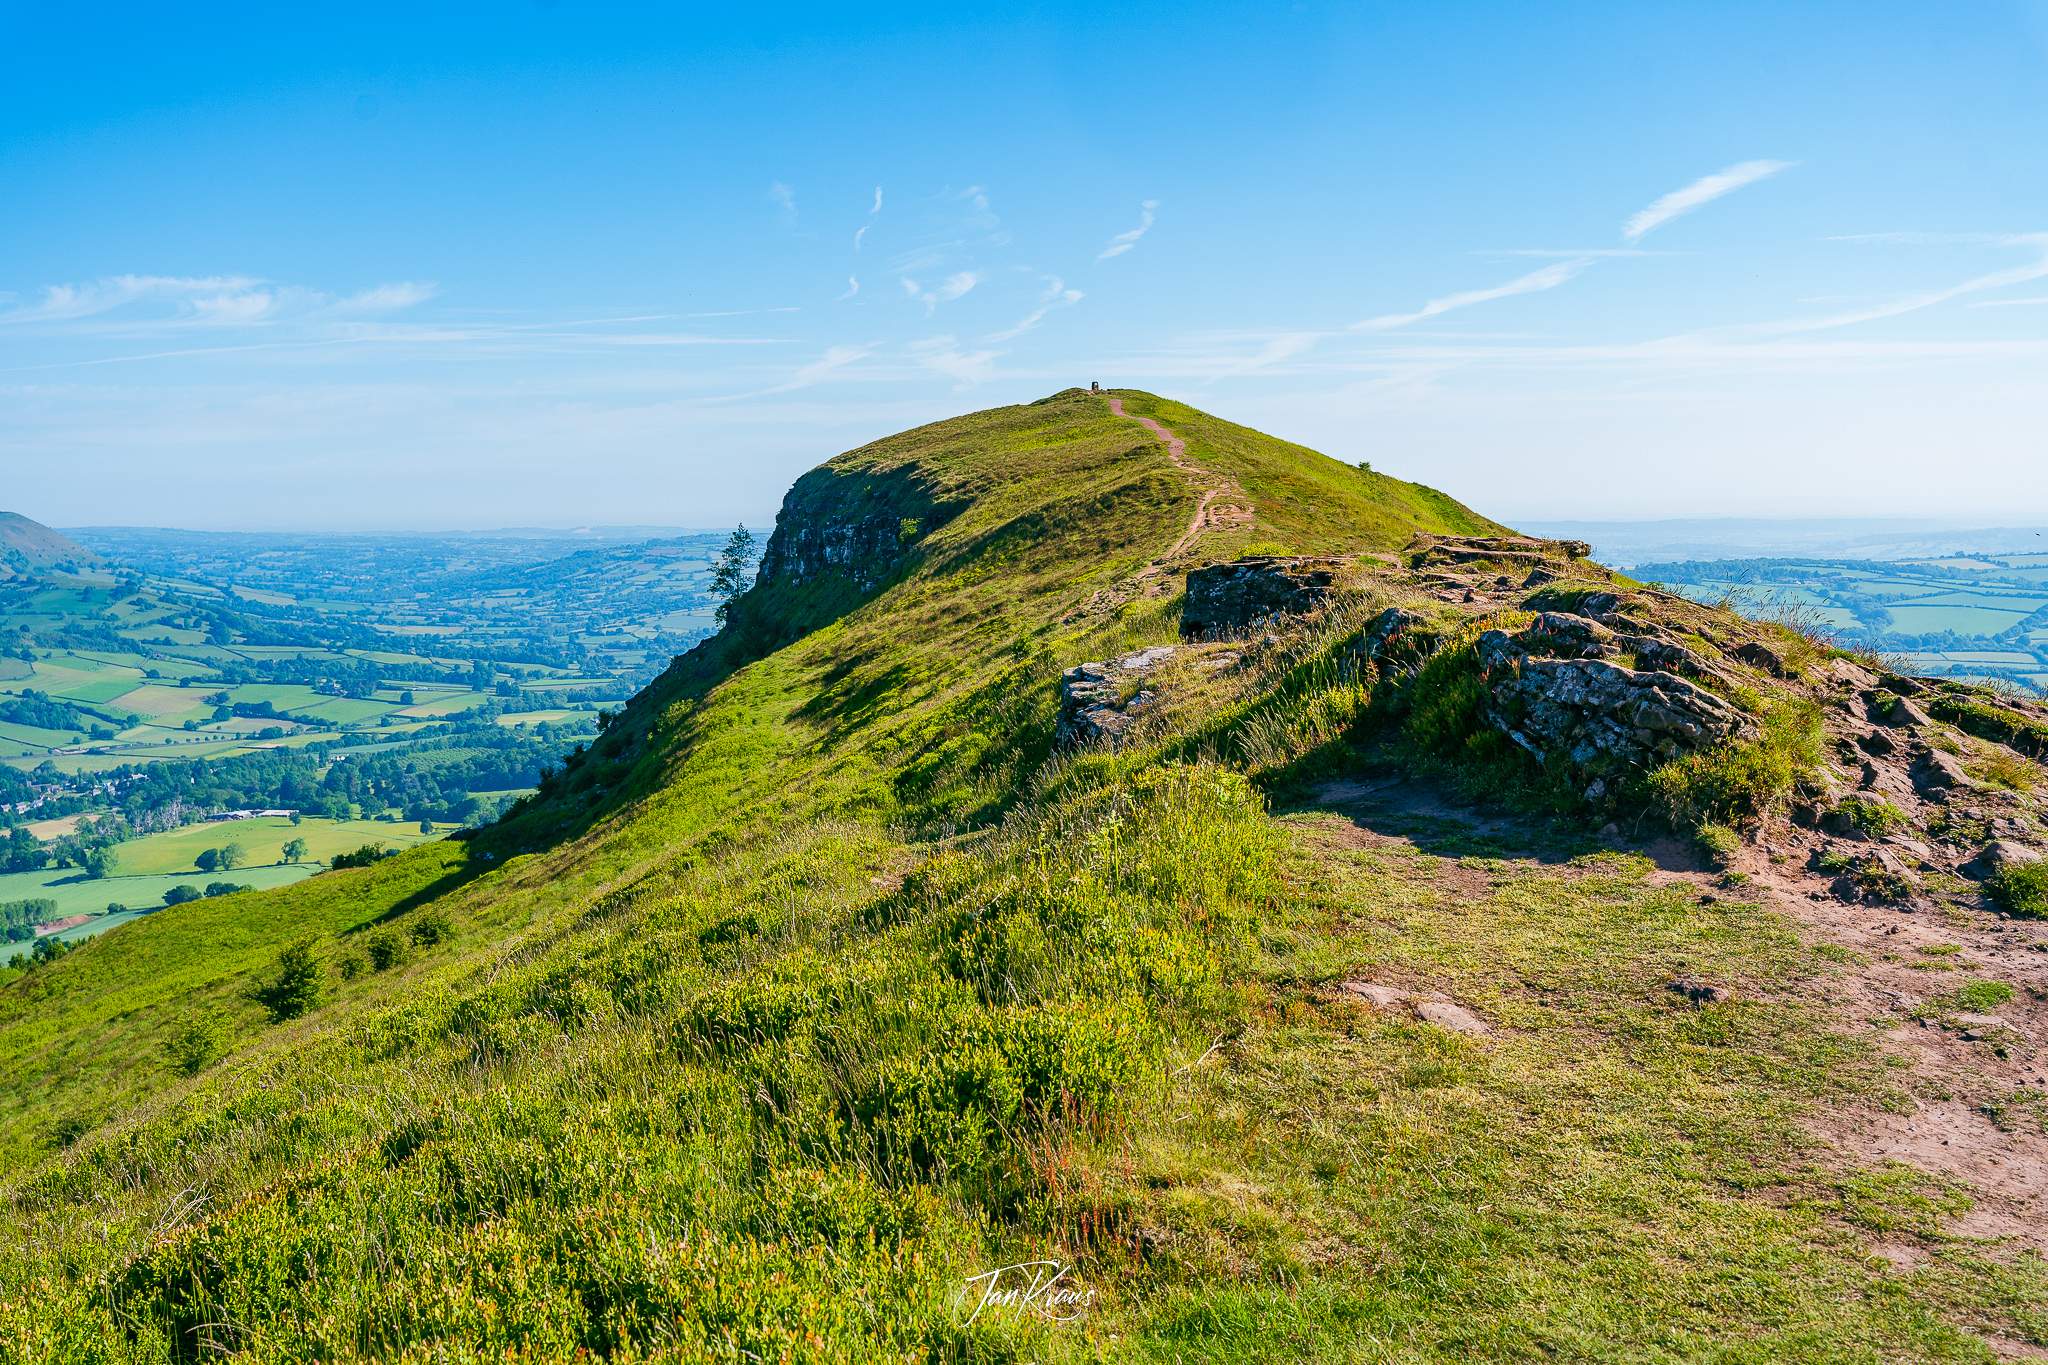 A view from the ridge towards the highest point of Skirrid Fawr, Wales, UK